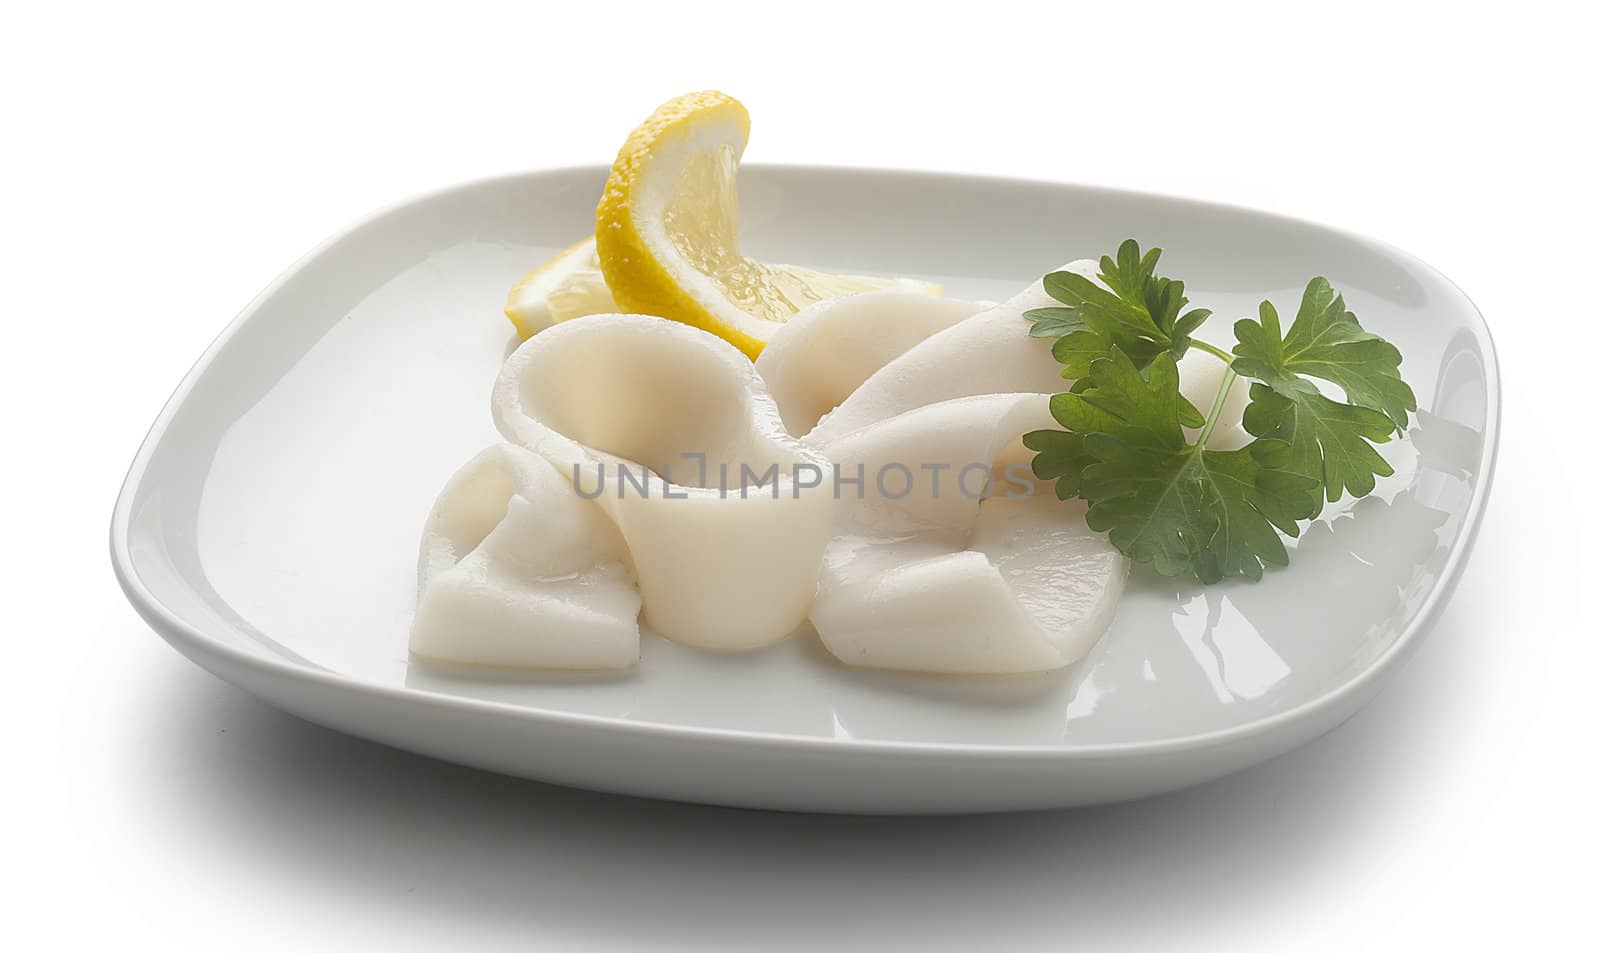 Some raw rings of squid with parsley and lemon on the white plate